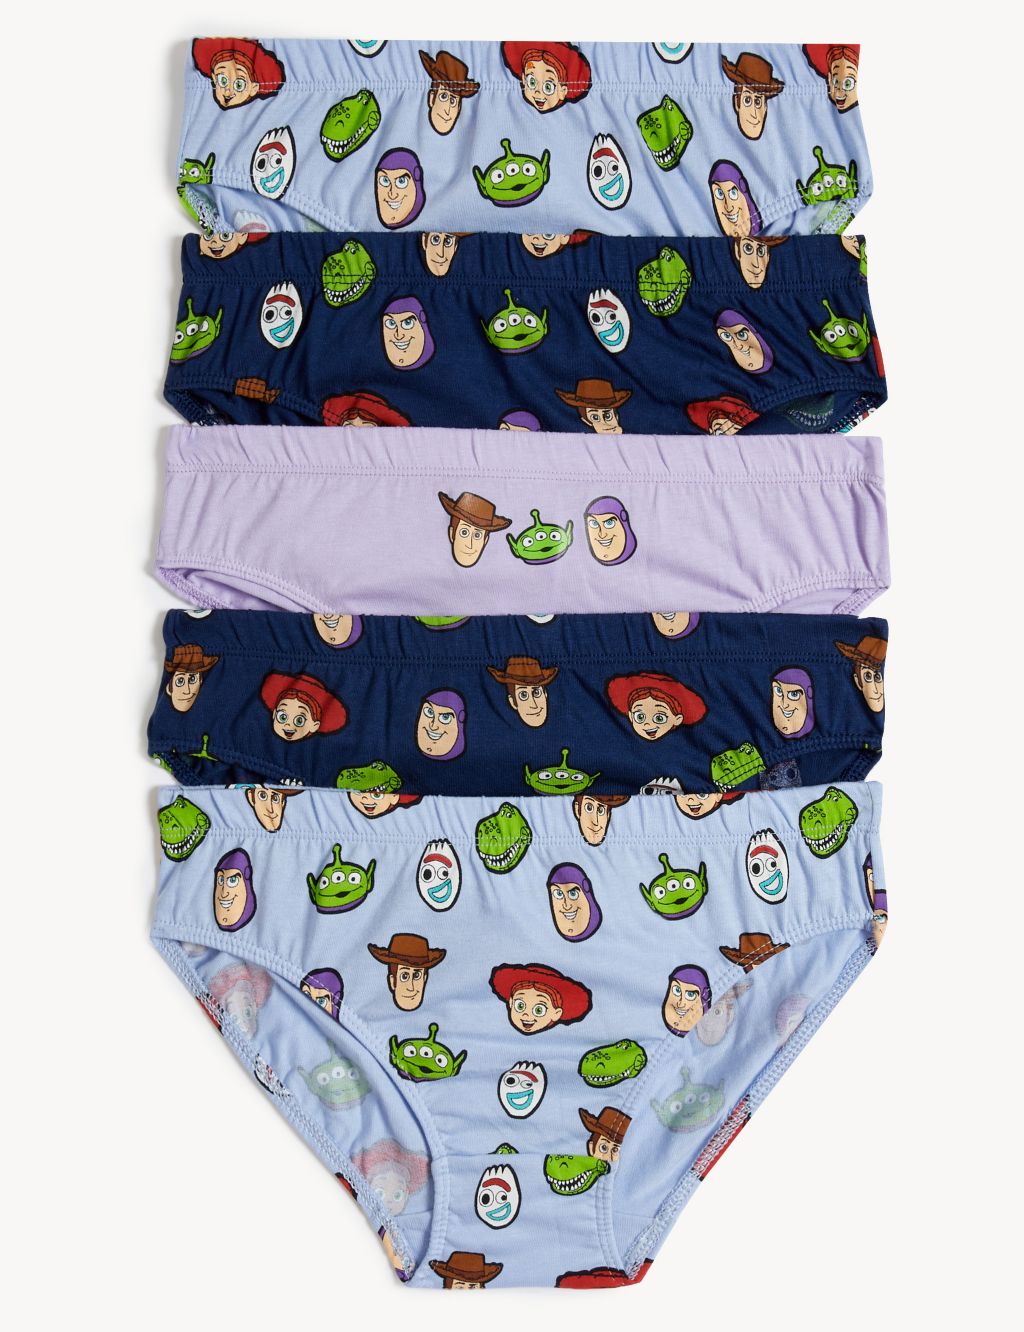 5pk Pure Cotton Toy Story™ Briefs (18 Mths - 7 Yrs) image 1